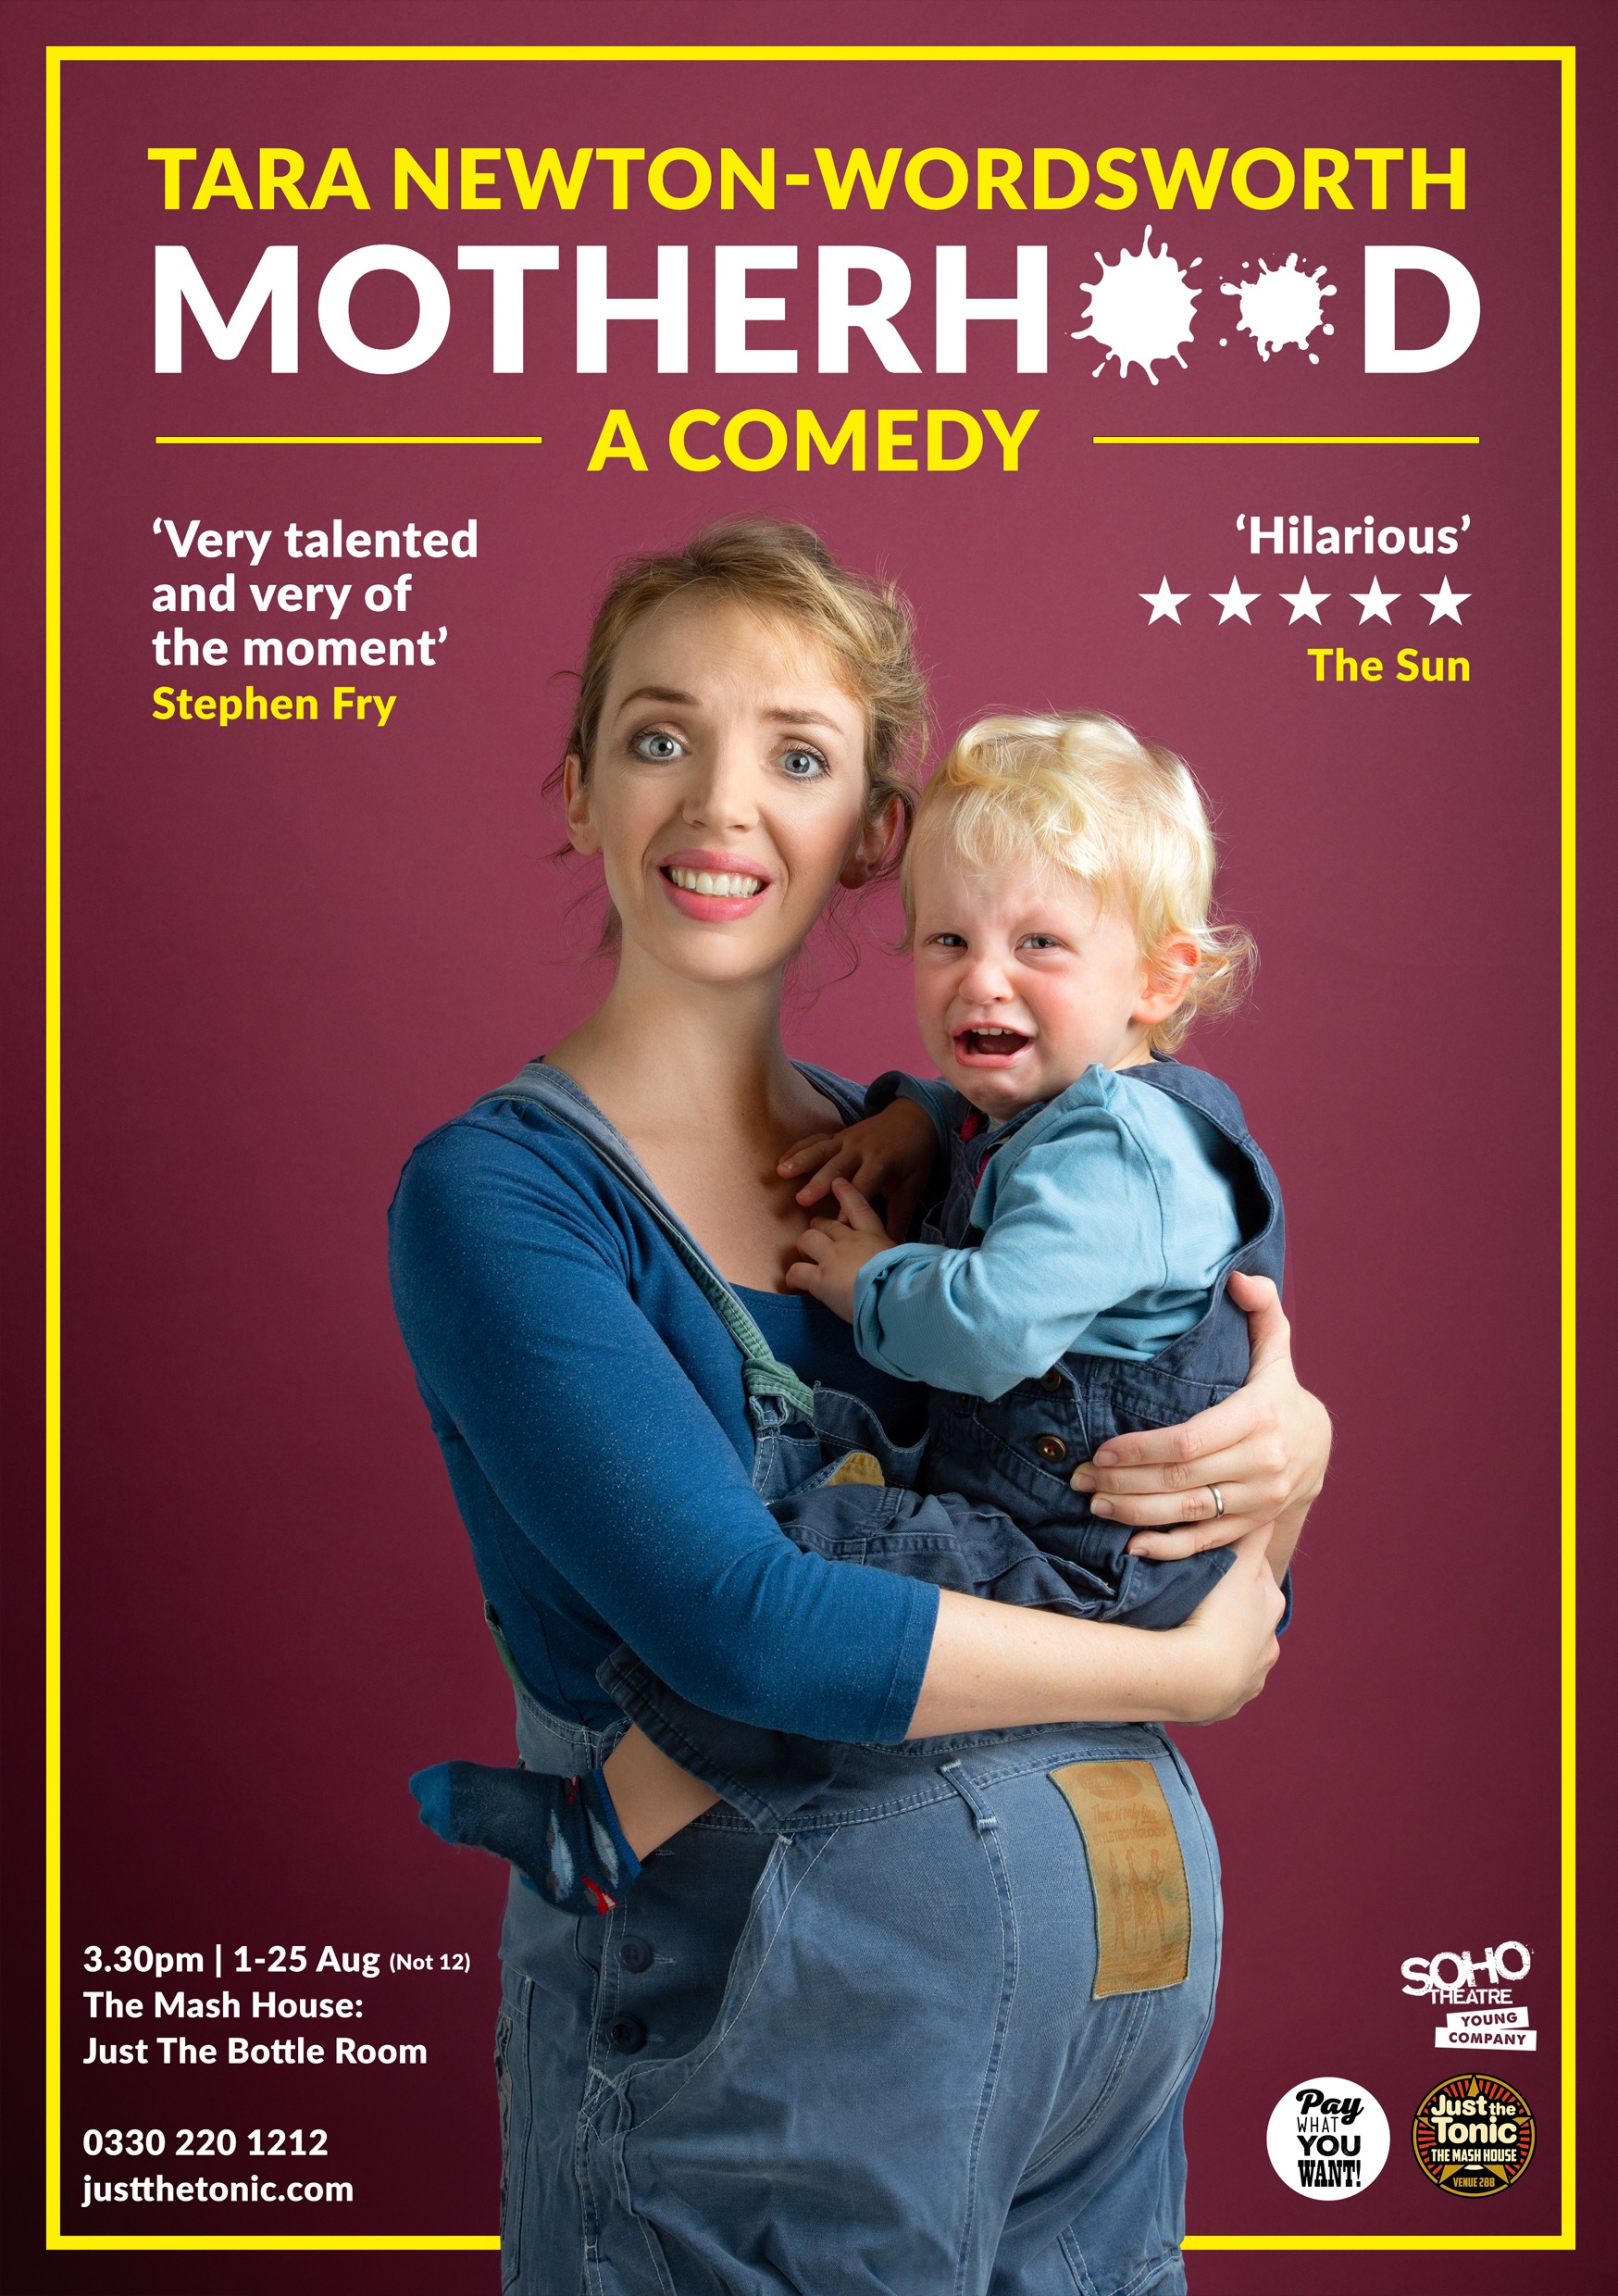 The poster for Motherhood: A Comedy